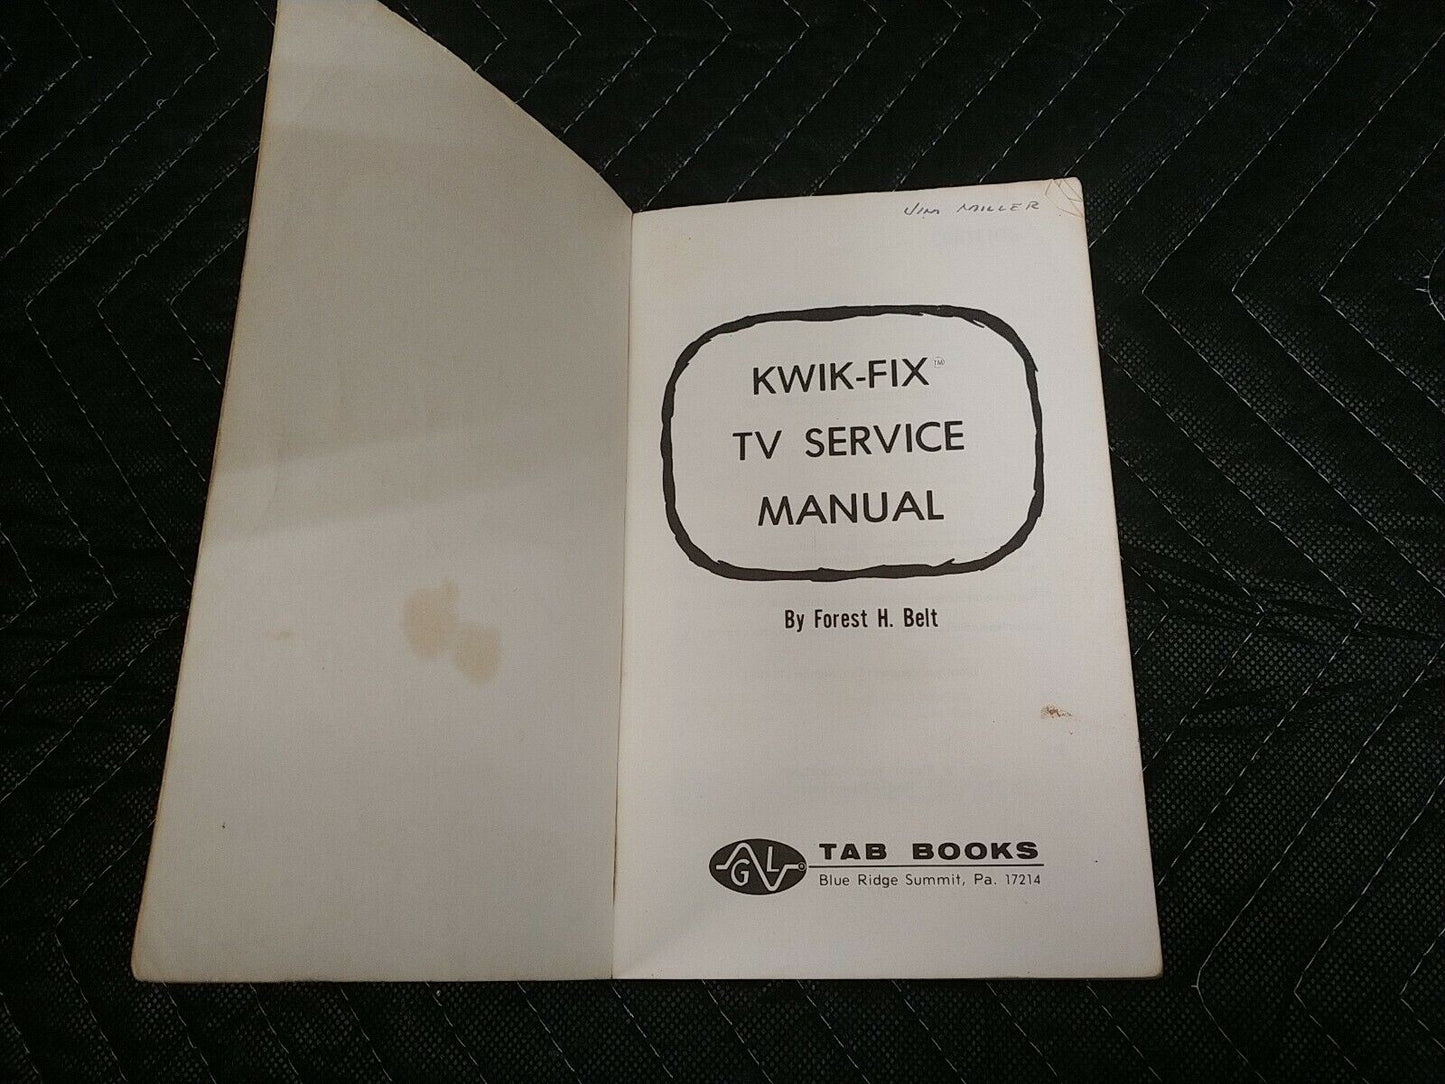 1972 Vintage Kwik-Fix TV Service Manual by Forest H. Belt First Edition